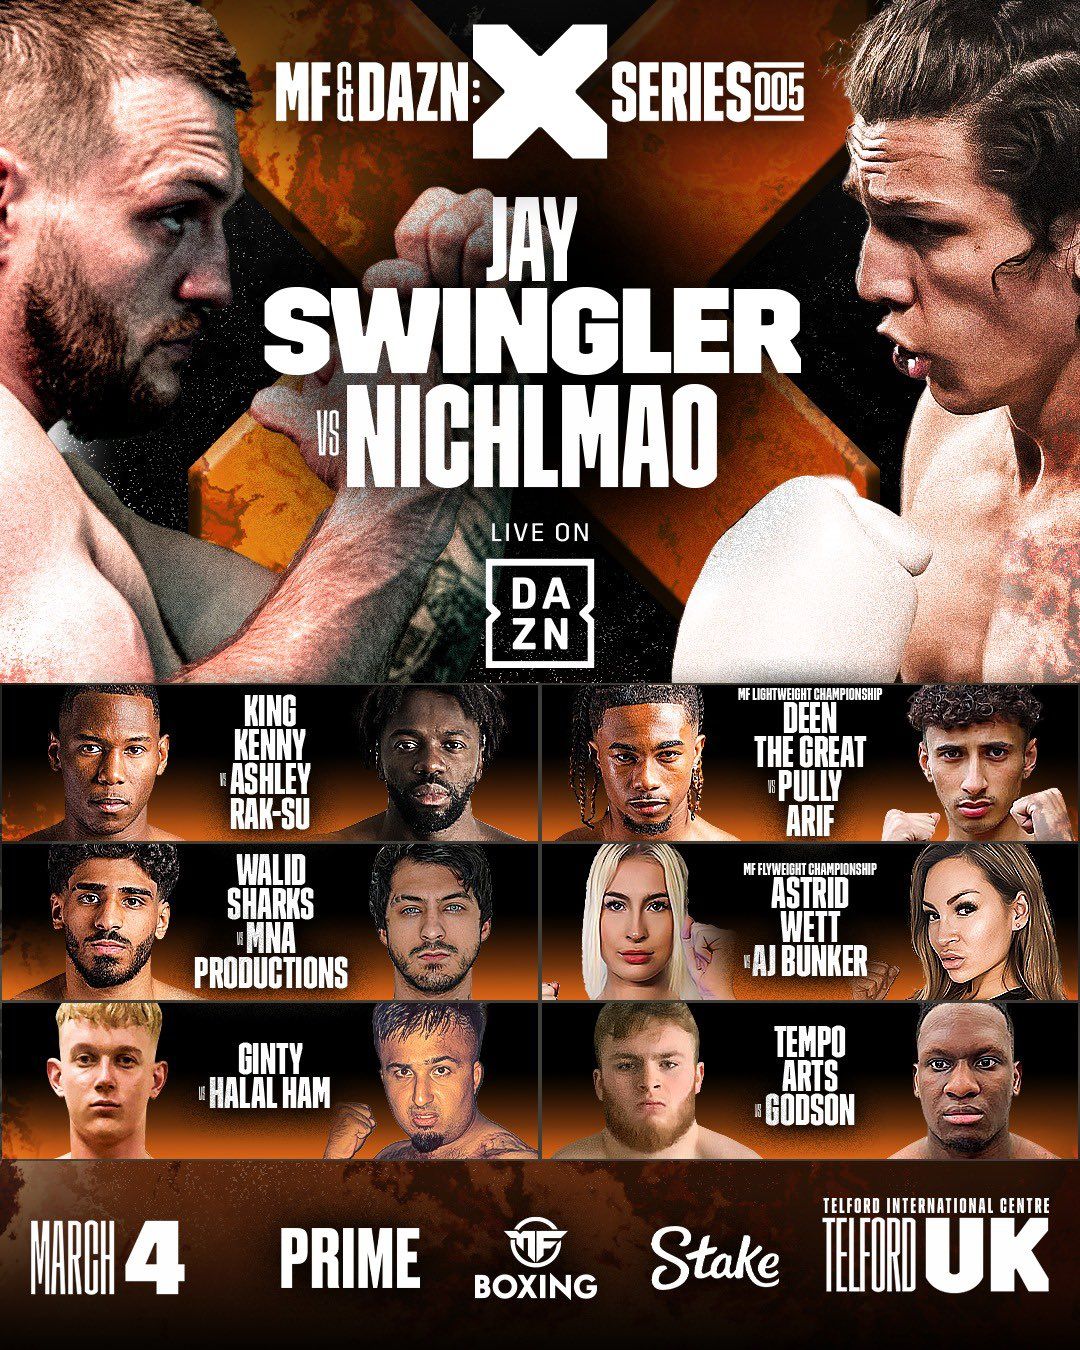 Misfits Boxing 005: Jay Swingler vs Nichlmao: Date, tickets, location, full card, live stream and more